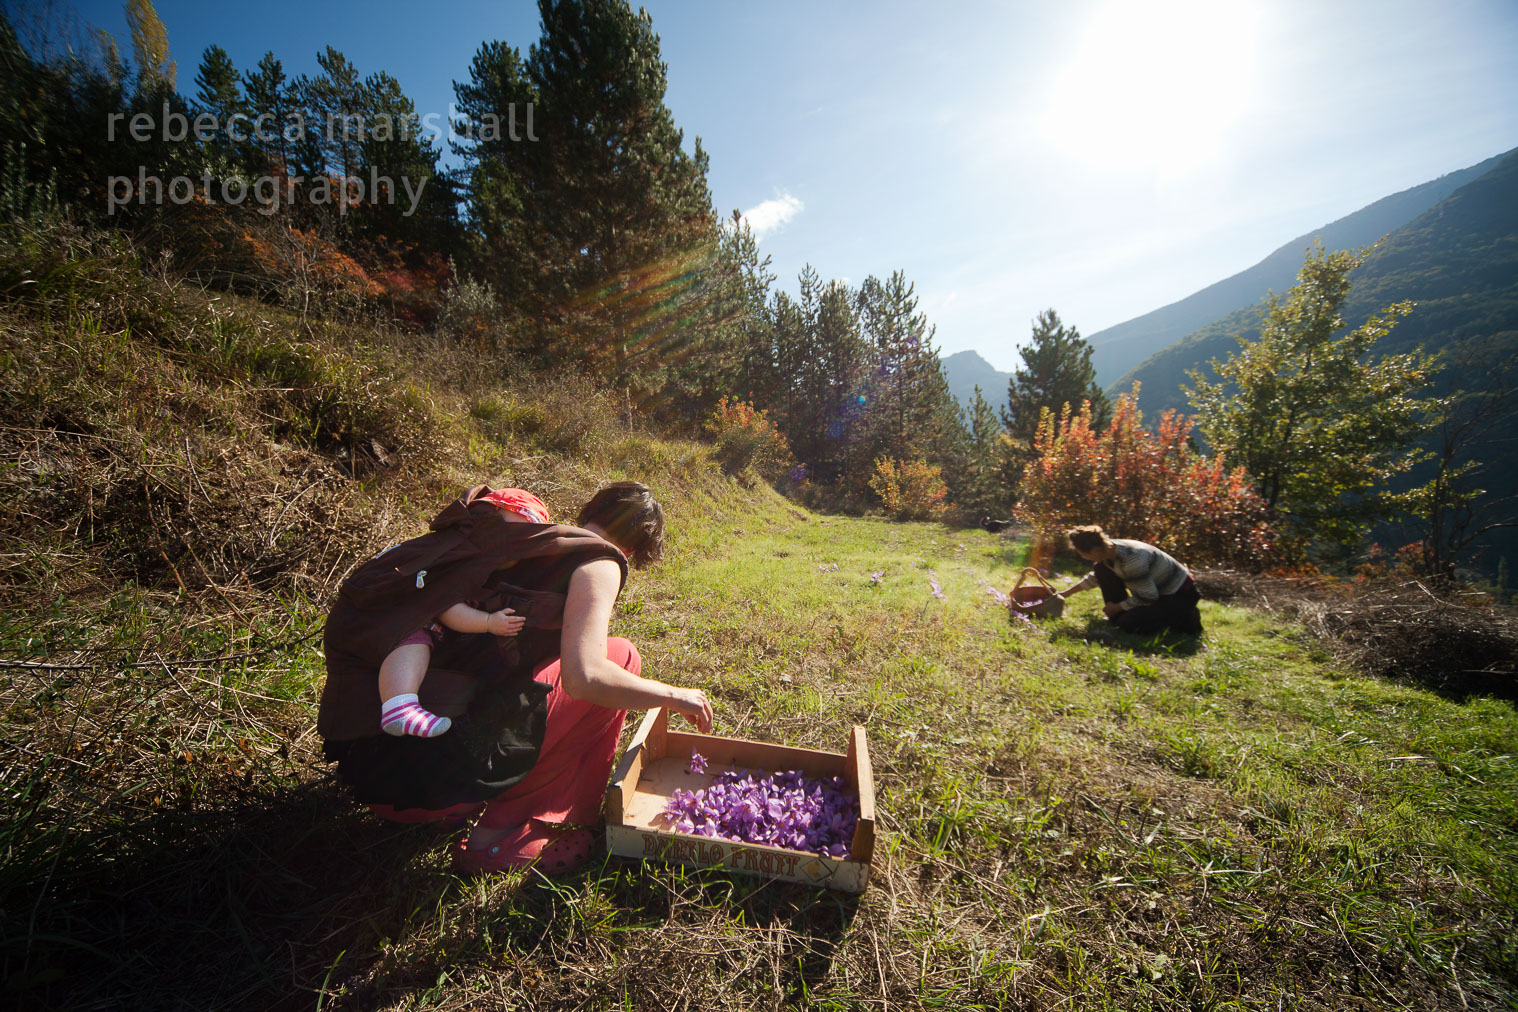 Two women, one with a baby strapped to her back, harvest saffron flowers by hand in a narrow field in the mountains